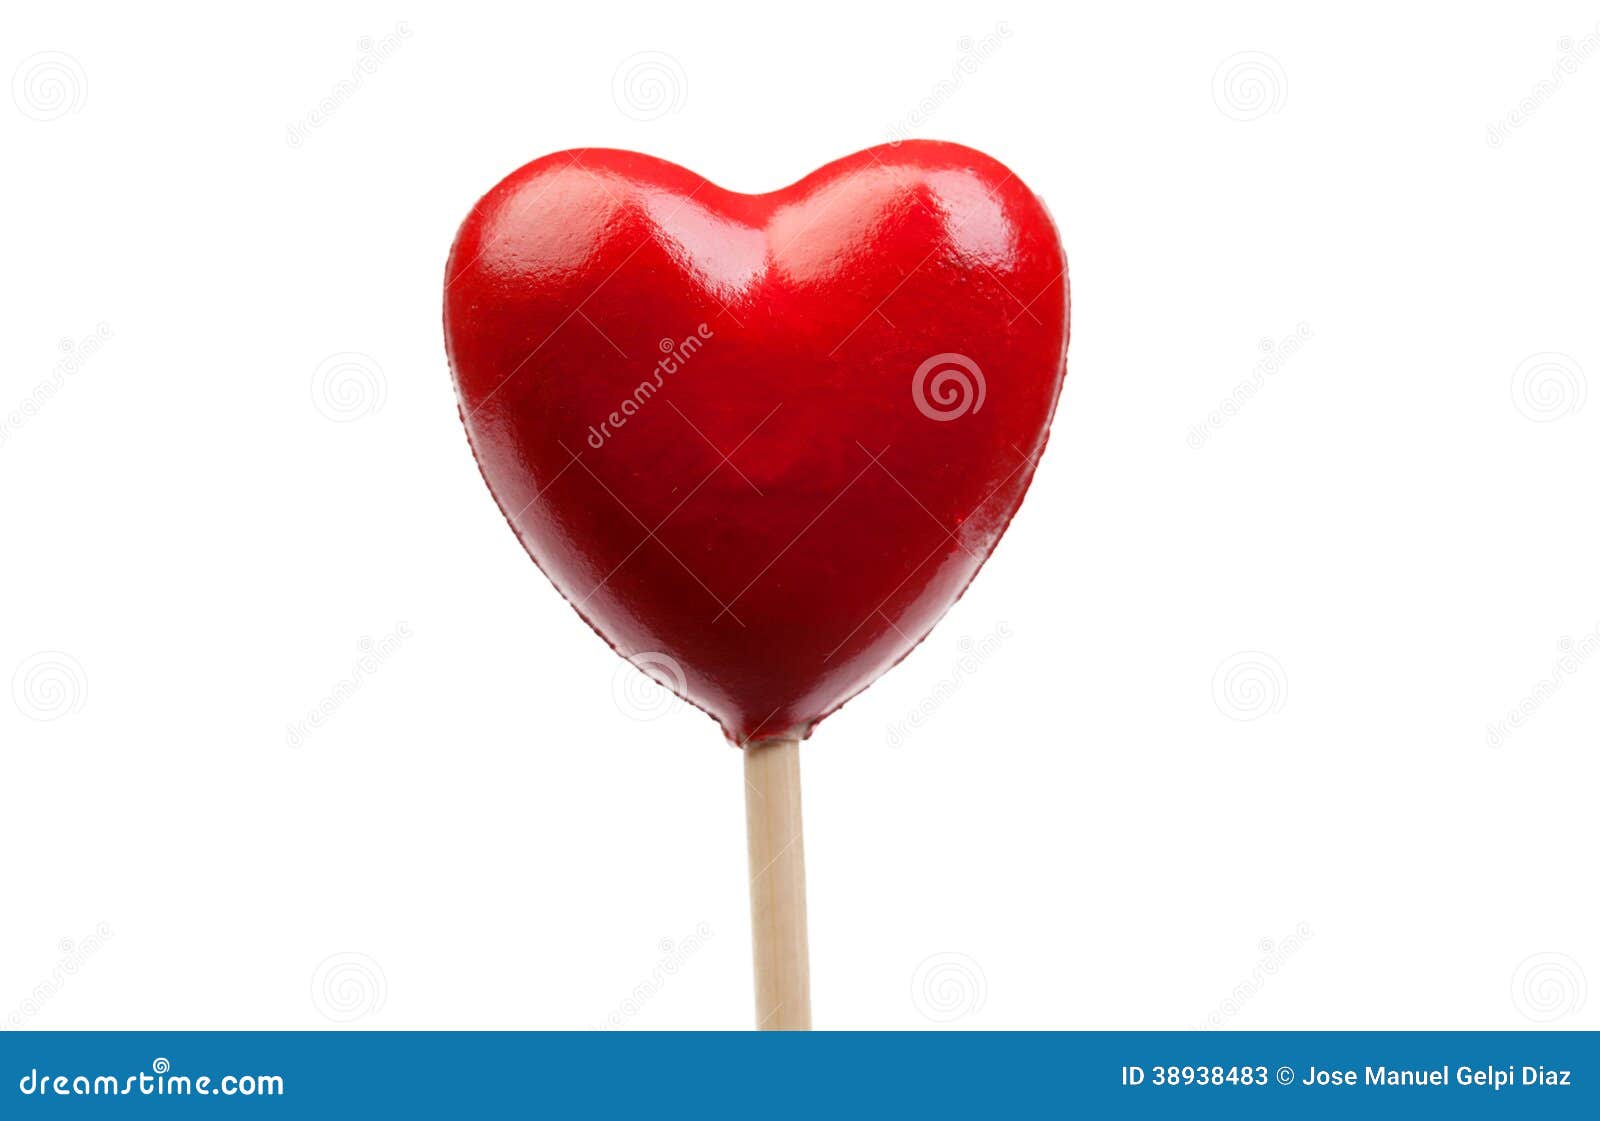 Red Heart Shaped Candy